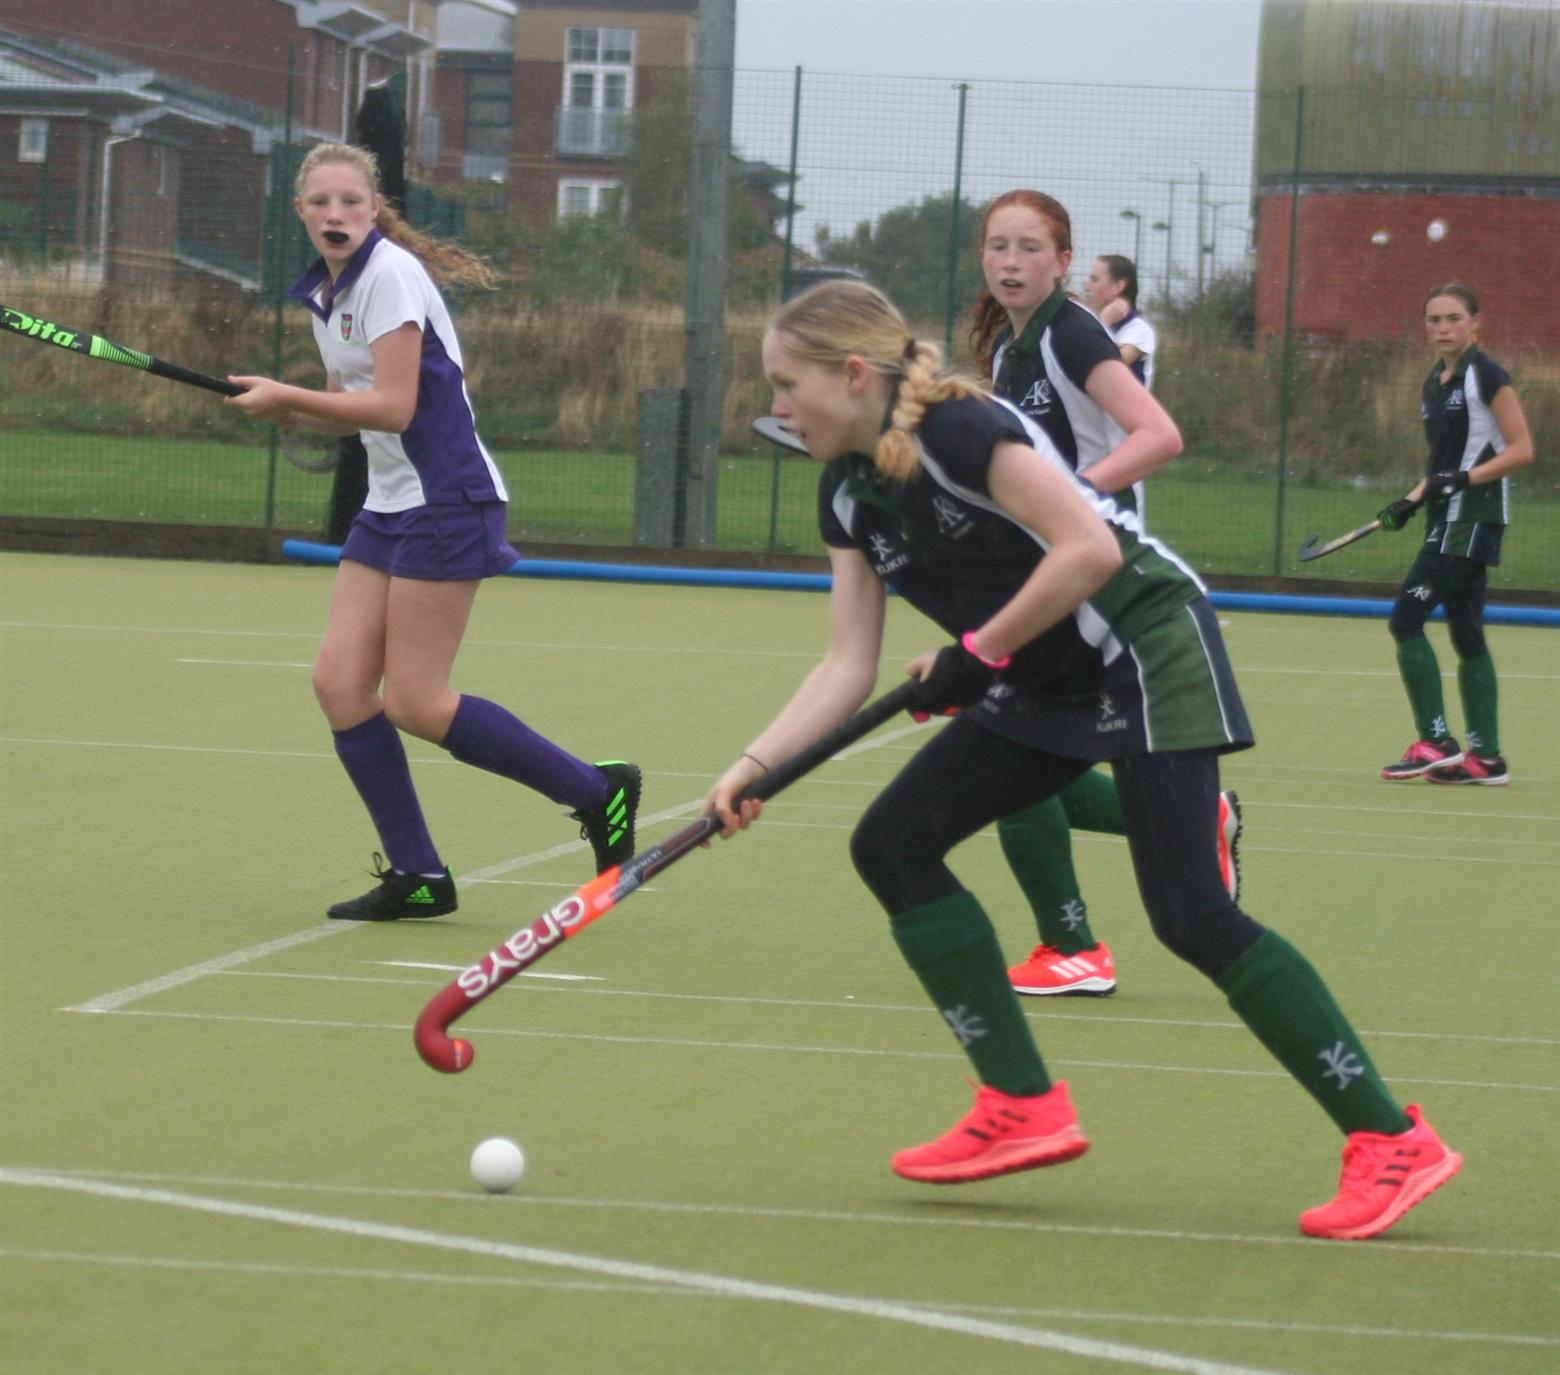 AKS U15 Hockey Team through to next round of Independent Schools Cup with win against Westholme